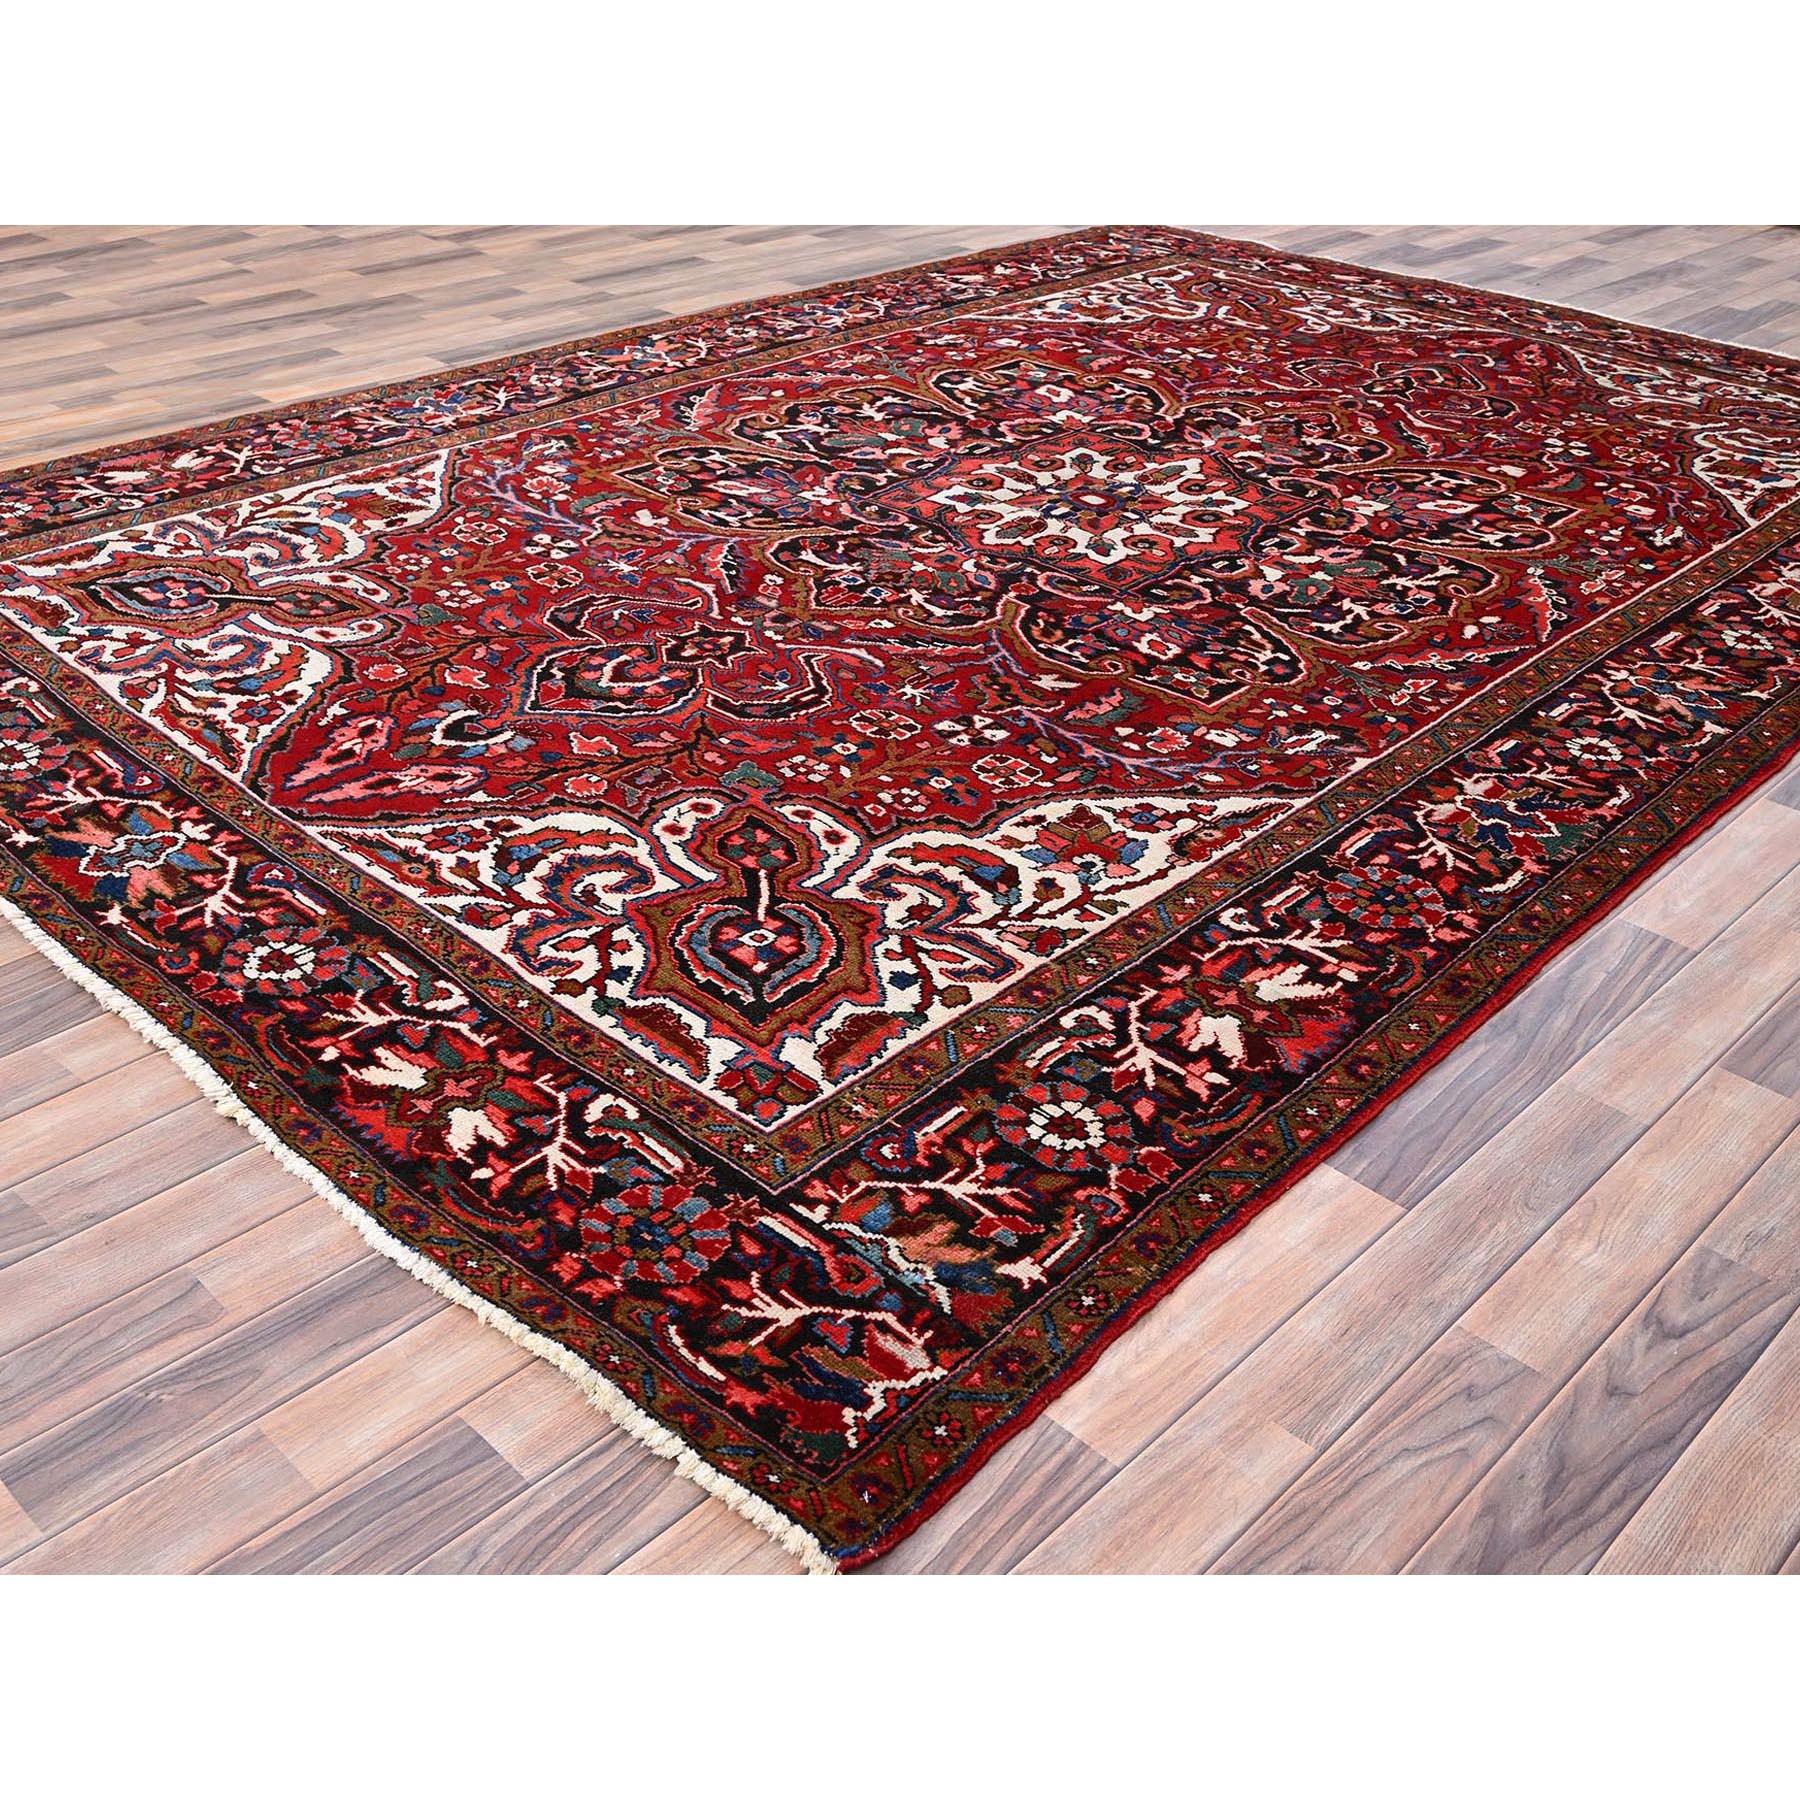 Hand-Knotted Red Rustic Feel Evenly Worn Pure Wool Hand Knotted Vintage Persian Heriz Rug